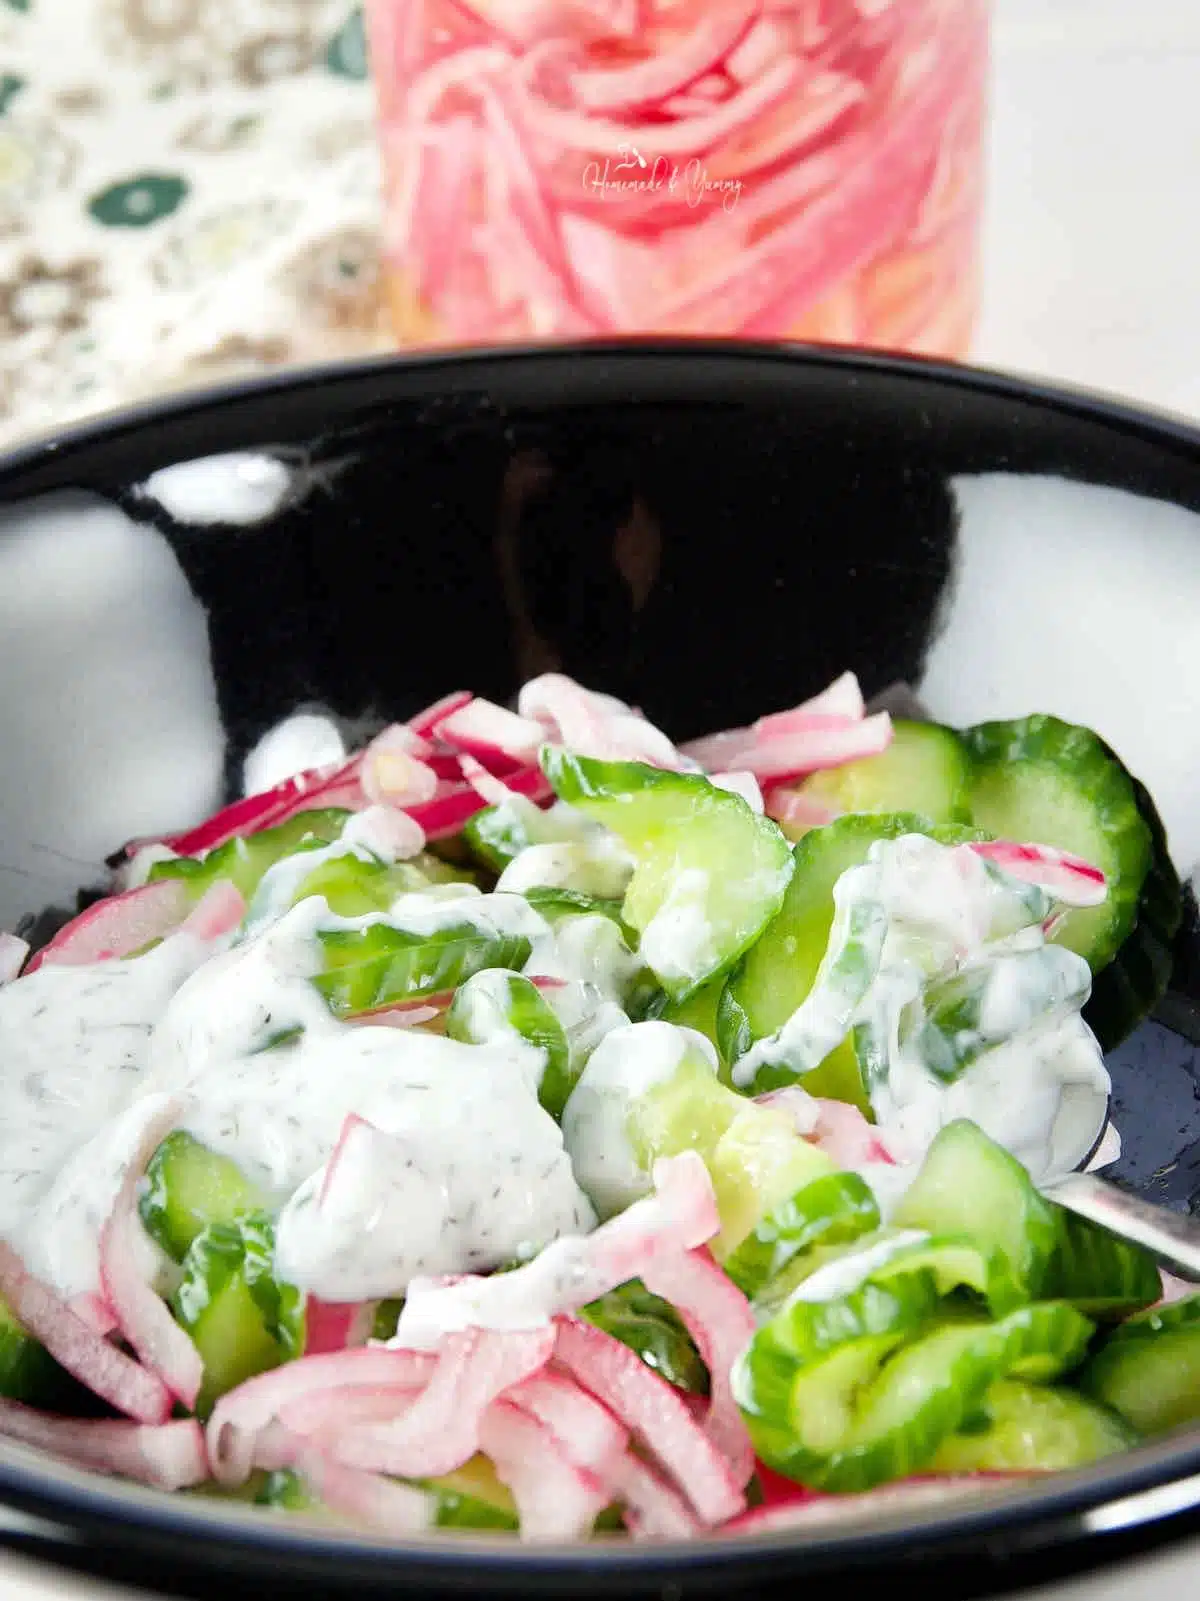 Sour cream and dill dressing with cucumbers and onions.